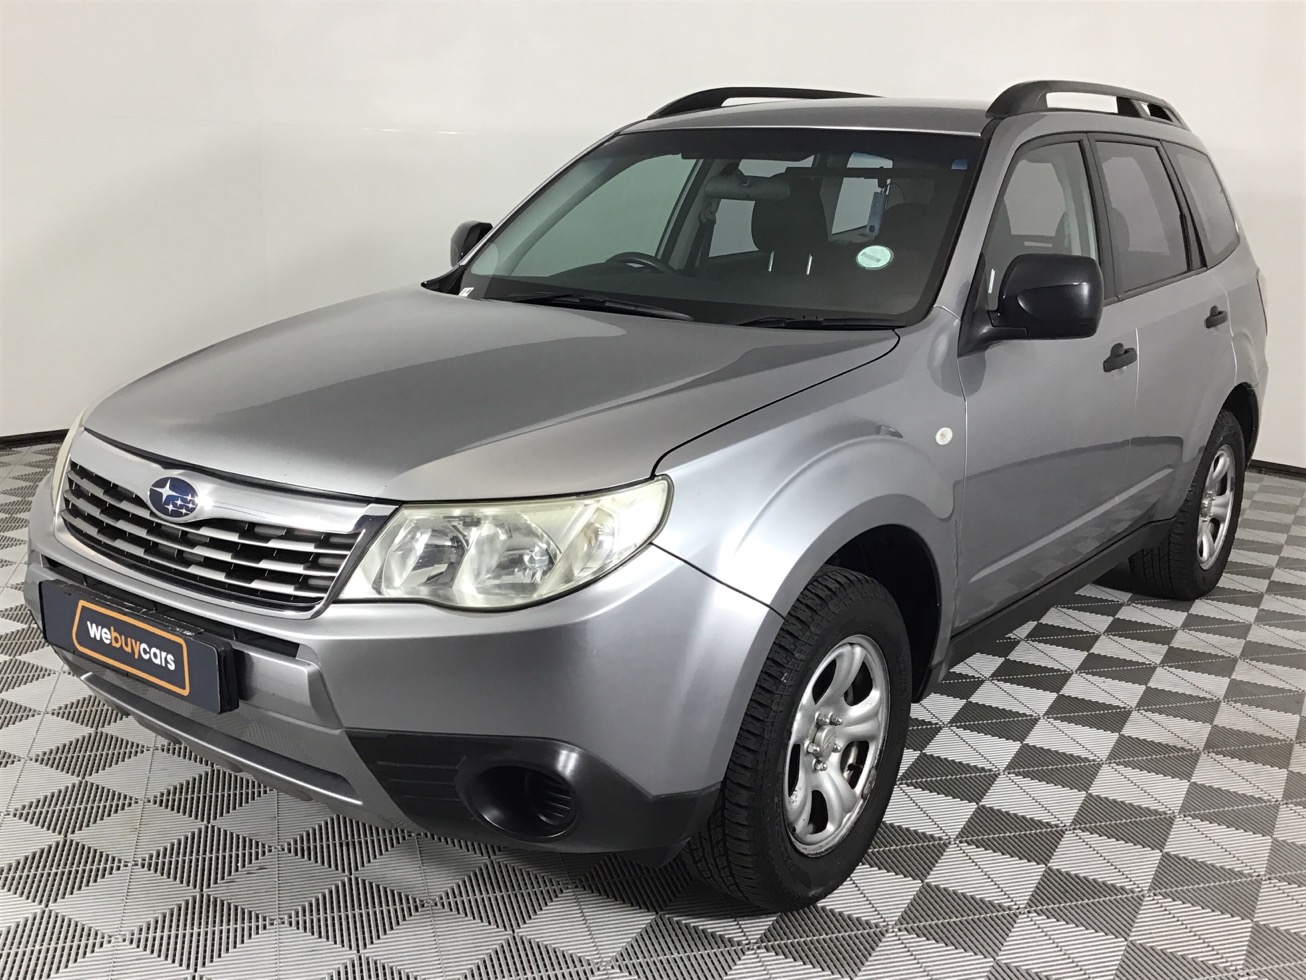 Used 2010 Subaru Forester 2.5 XT for sale WeBuyCars